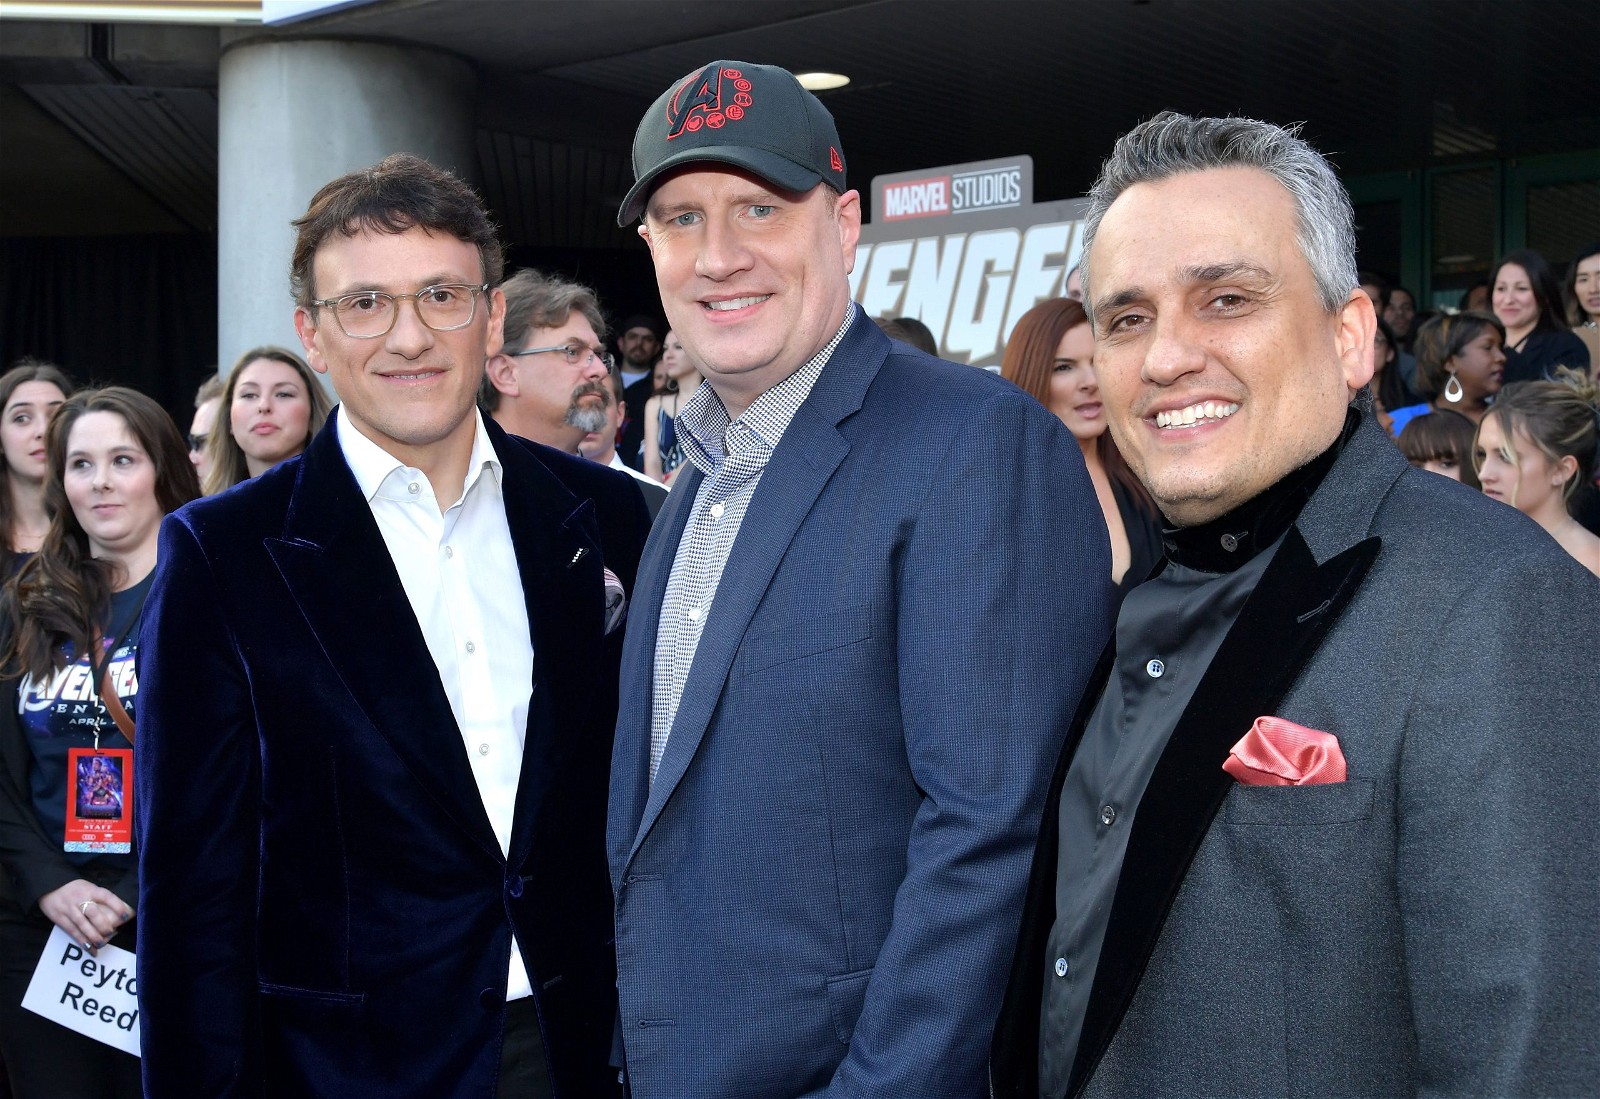 The Russo Brothers with Kevin Feige at an event